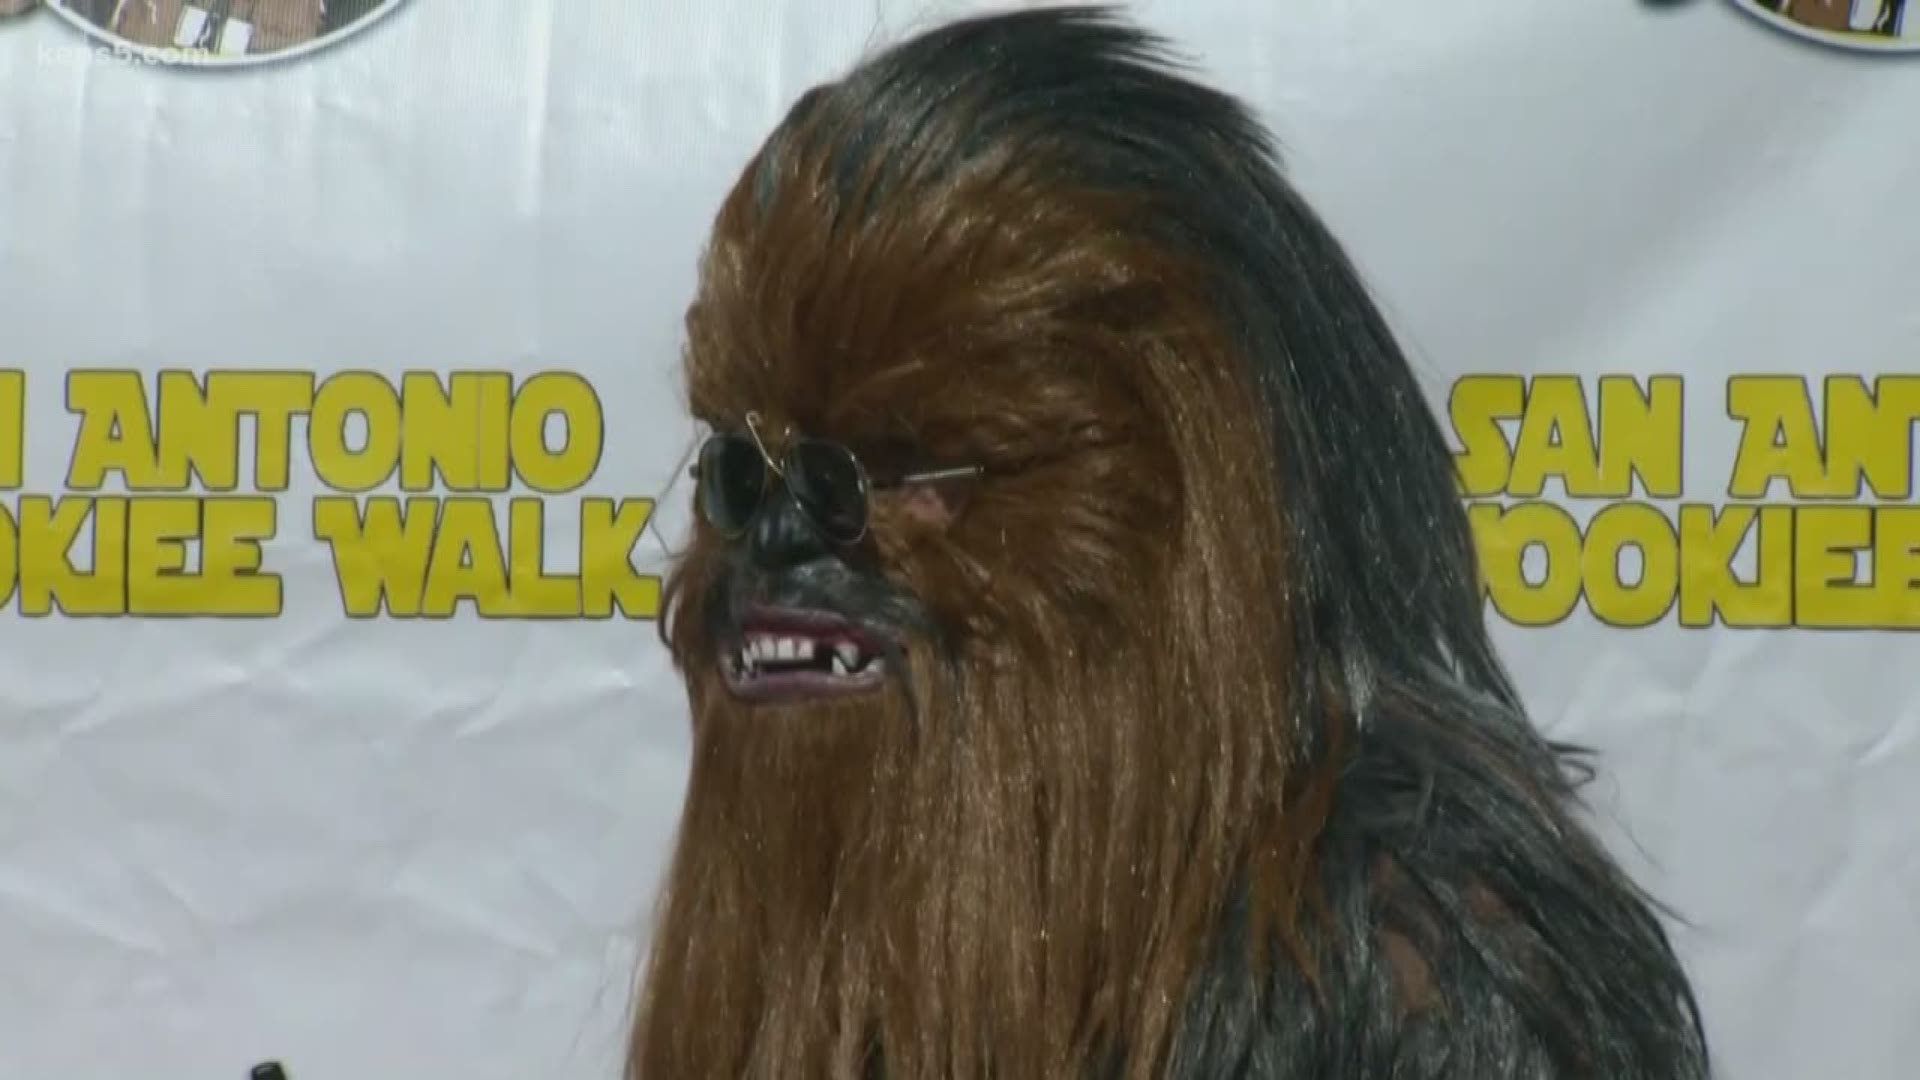 Northwest Vista College held a Saturday event that included a costume design and showing of the "The Last Jedi," while also honoring the late Peter Mayhew.